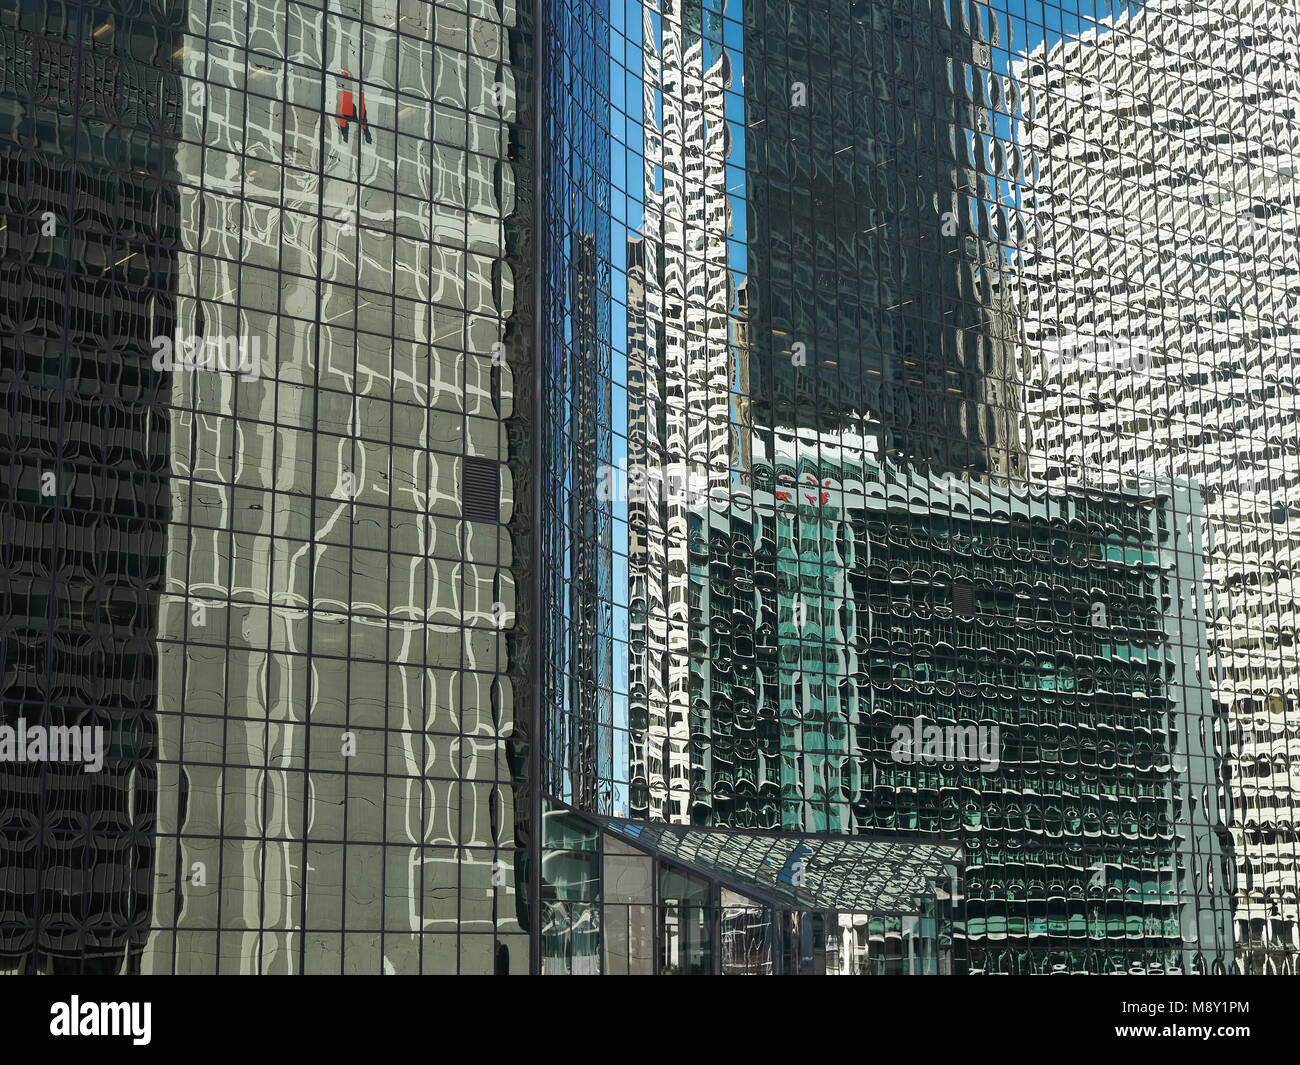 abstract image of Chicago buildings reflected in glass Stock Photo